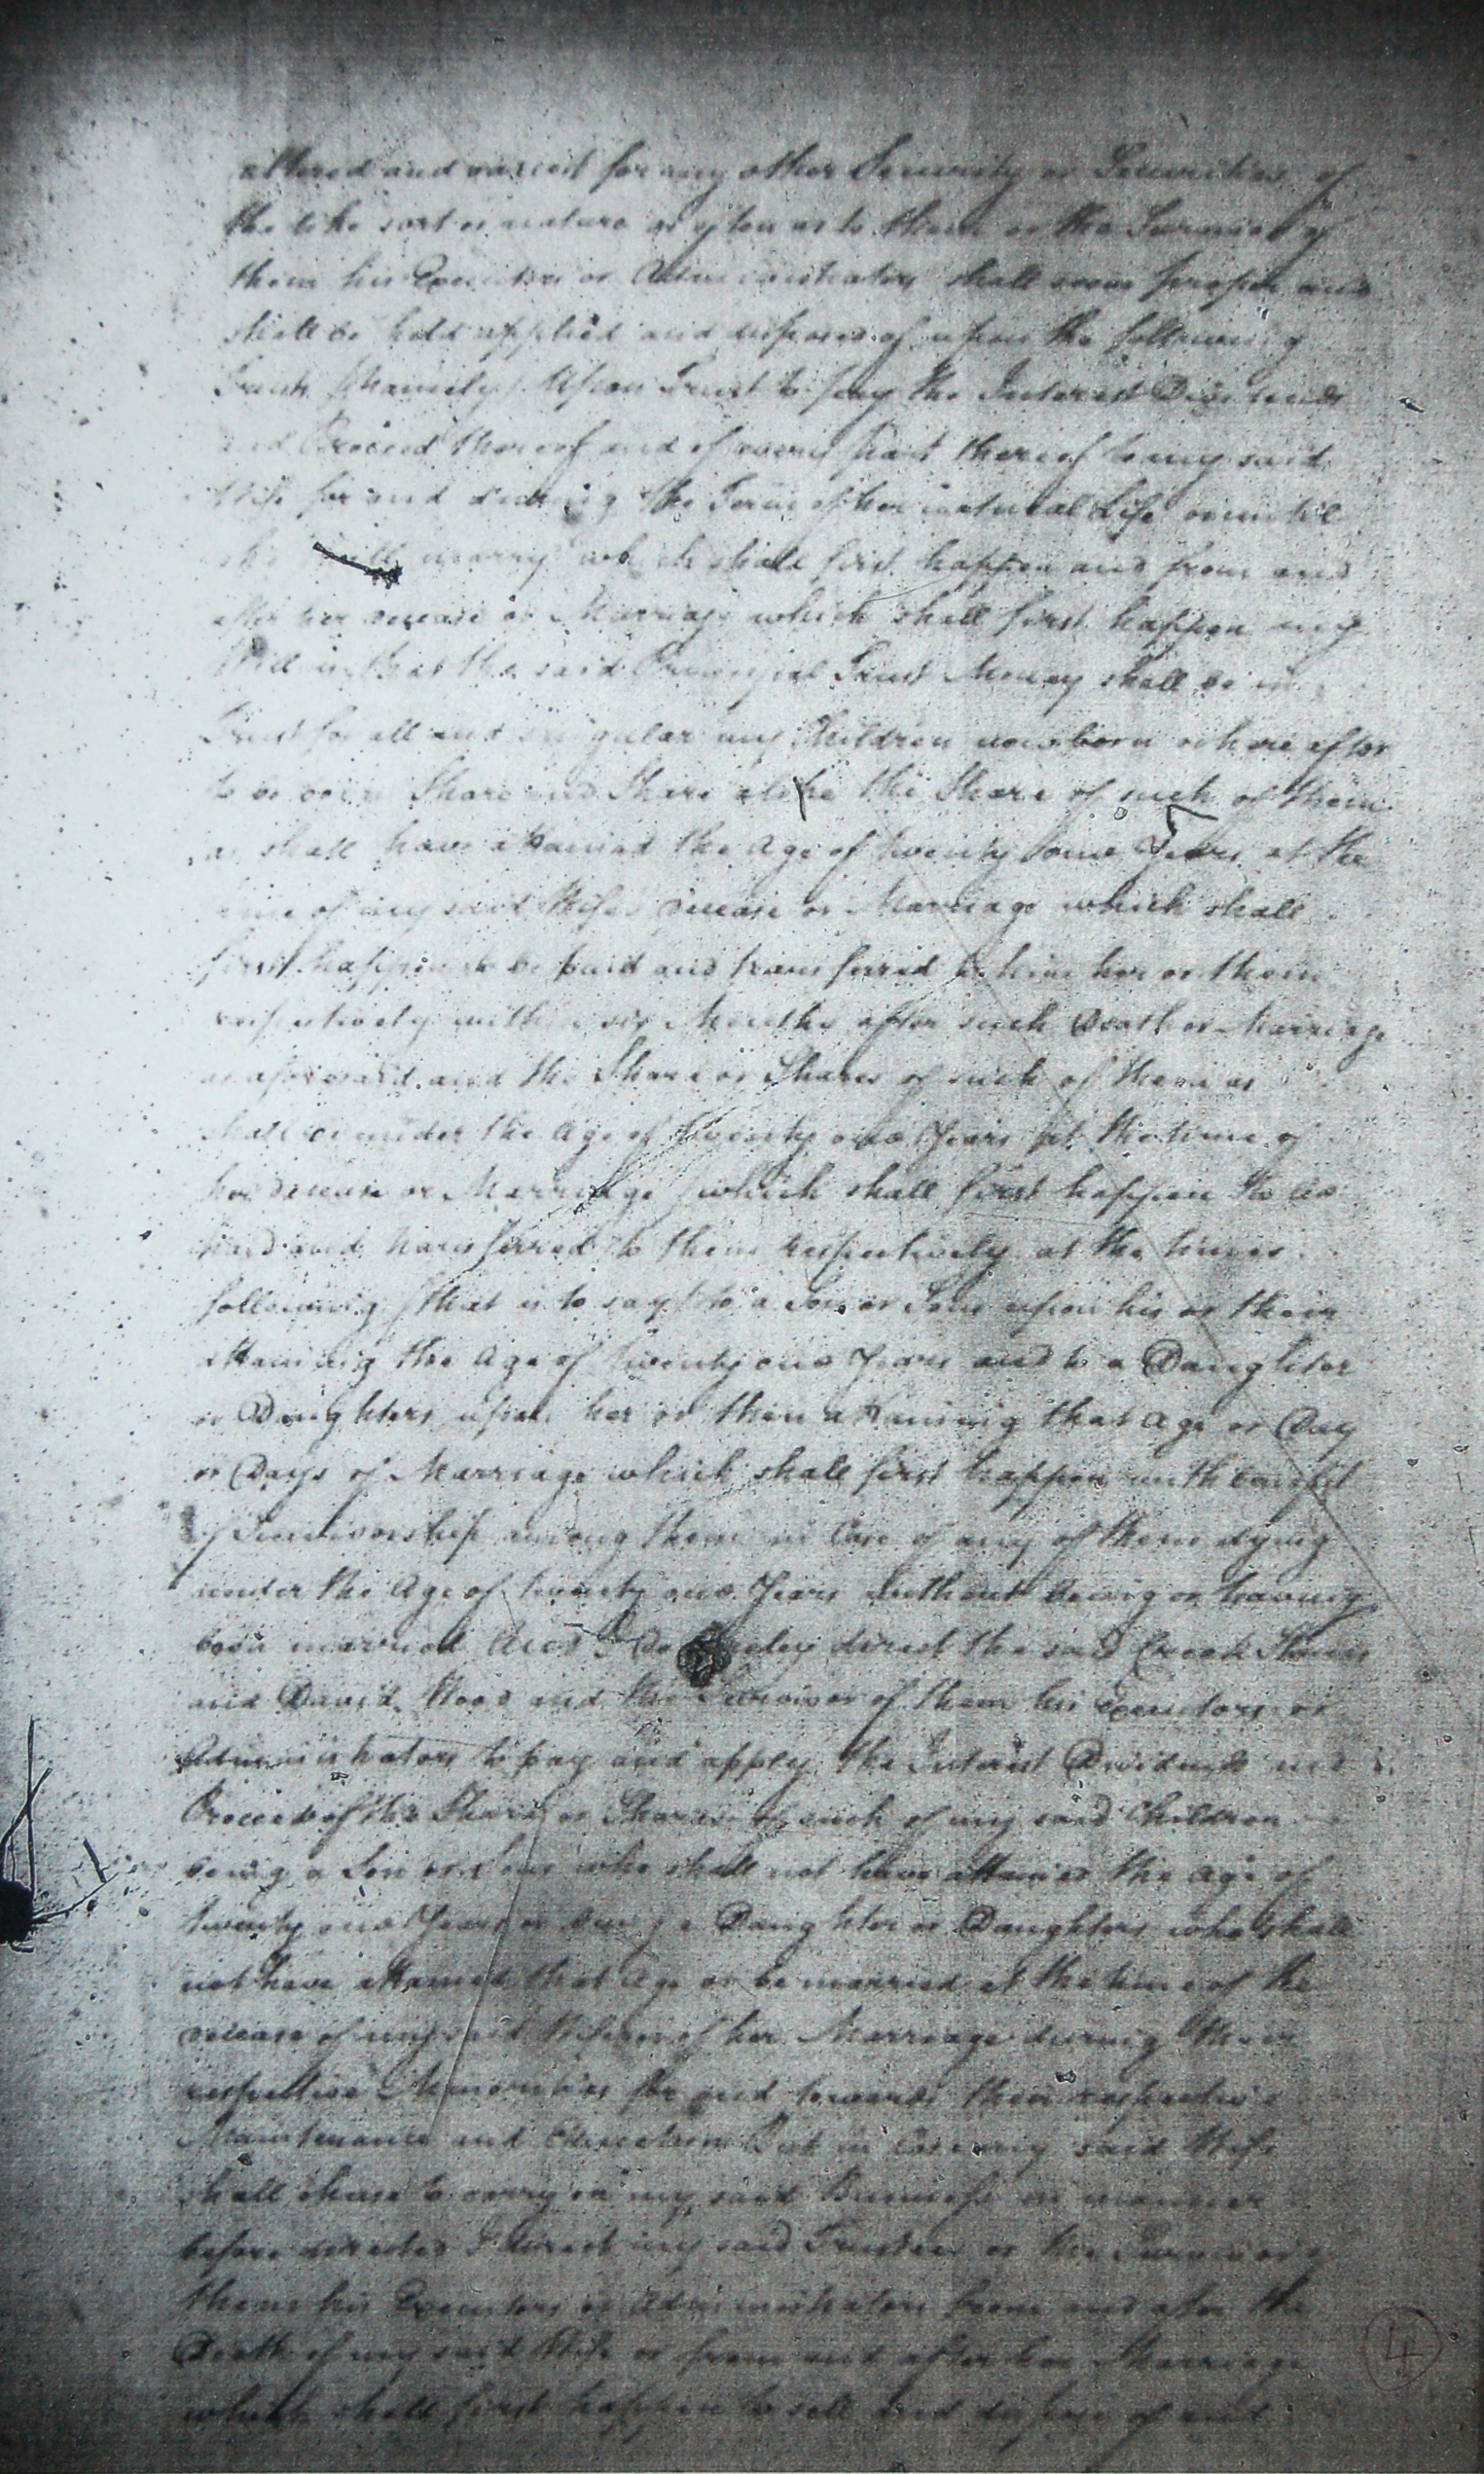 The will of Richard Balls, 1798, page 4